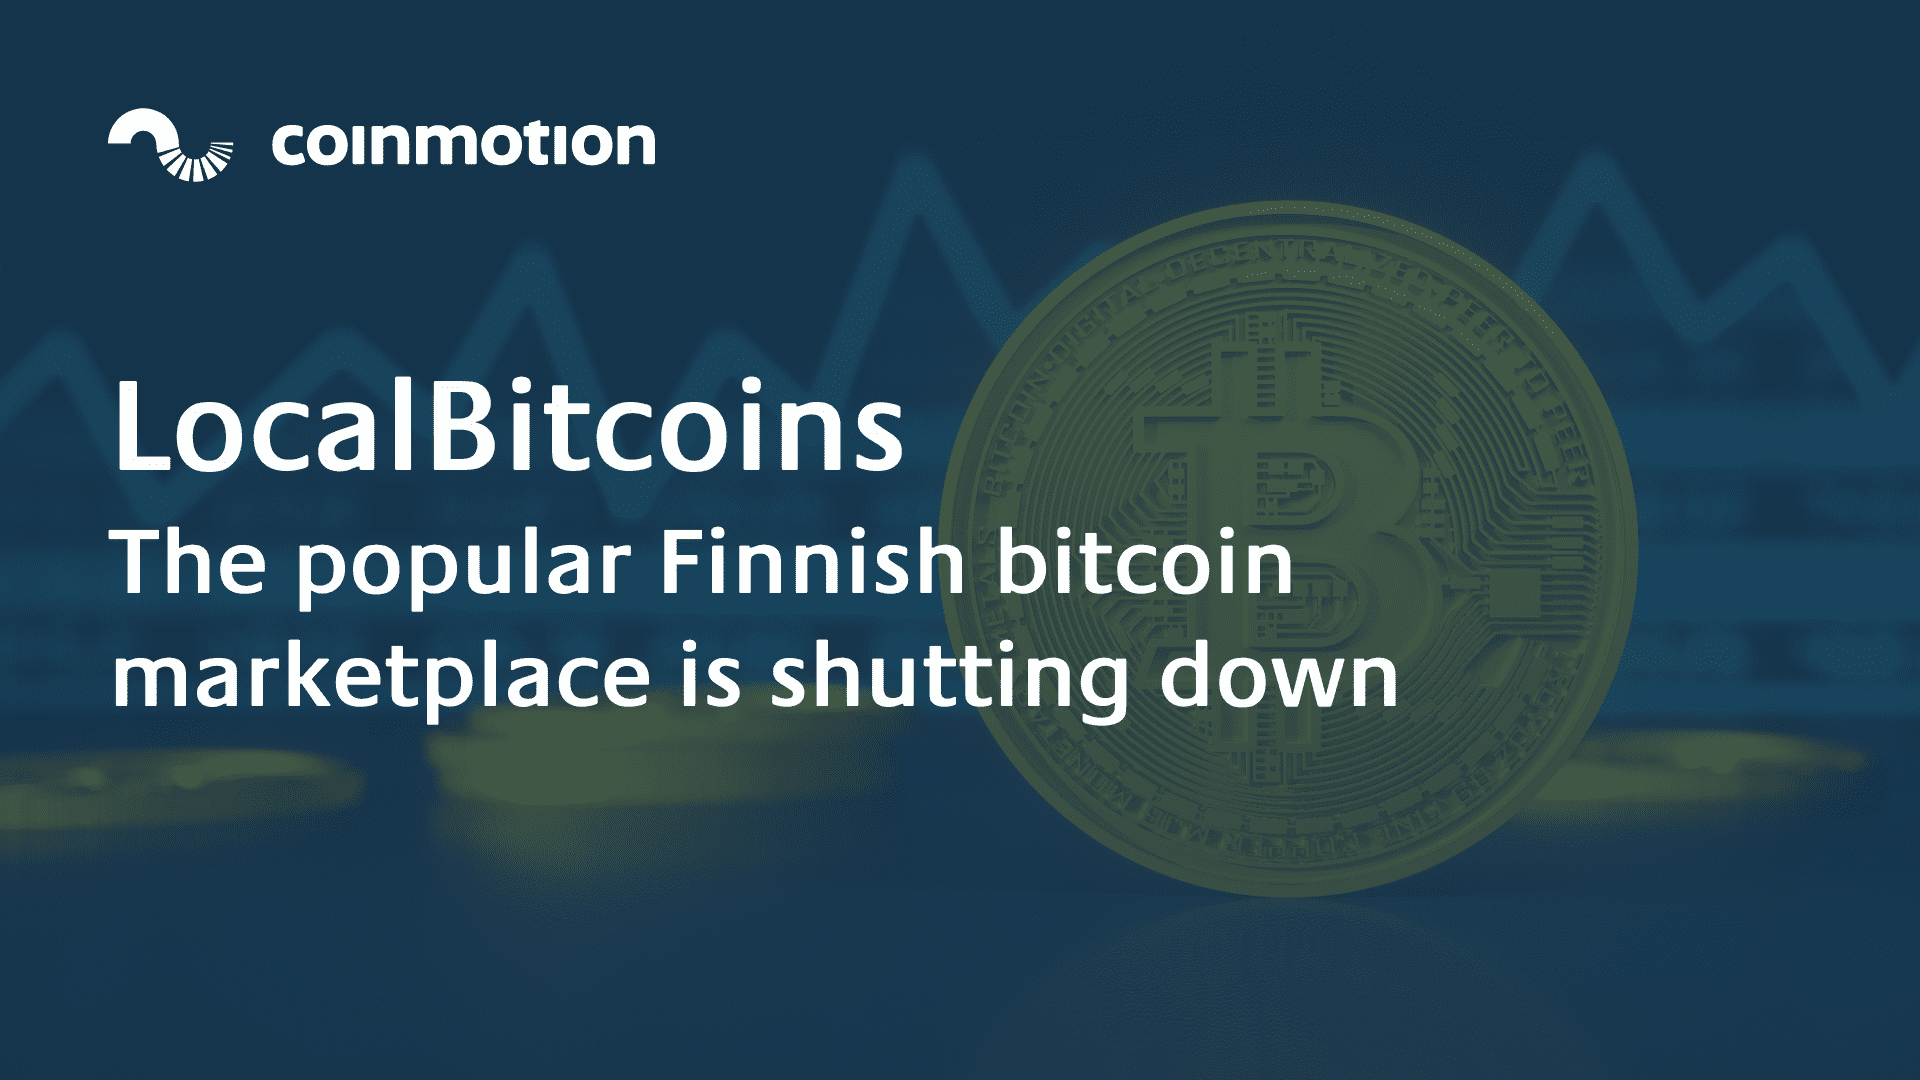 Bitcoin marketplace LocalBitcoins is closing — here’s how to transfer funds to Coinmotion